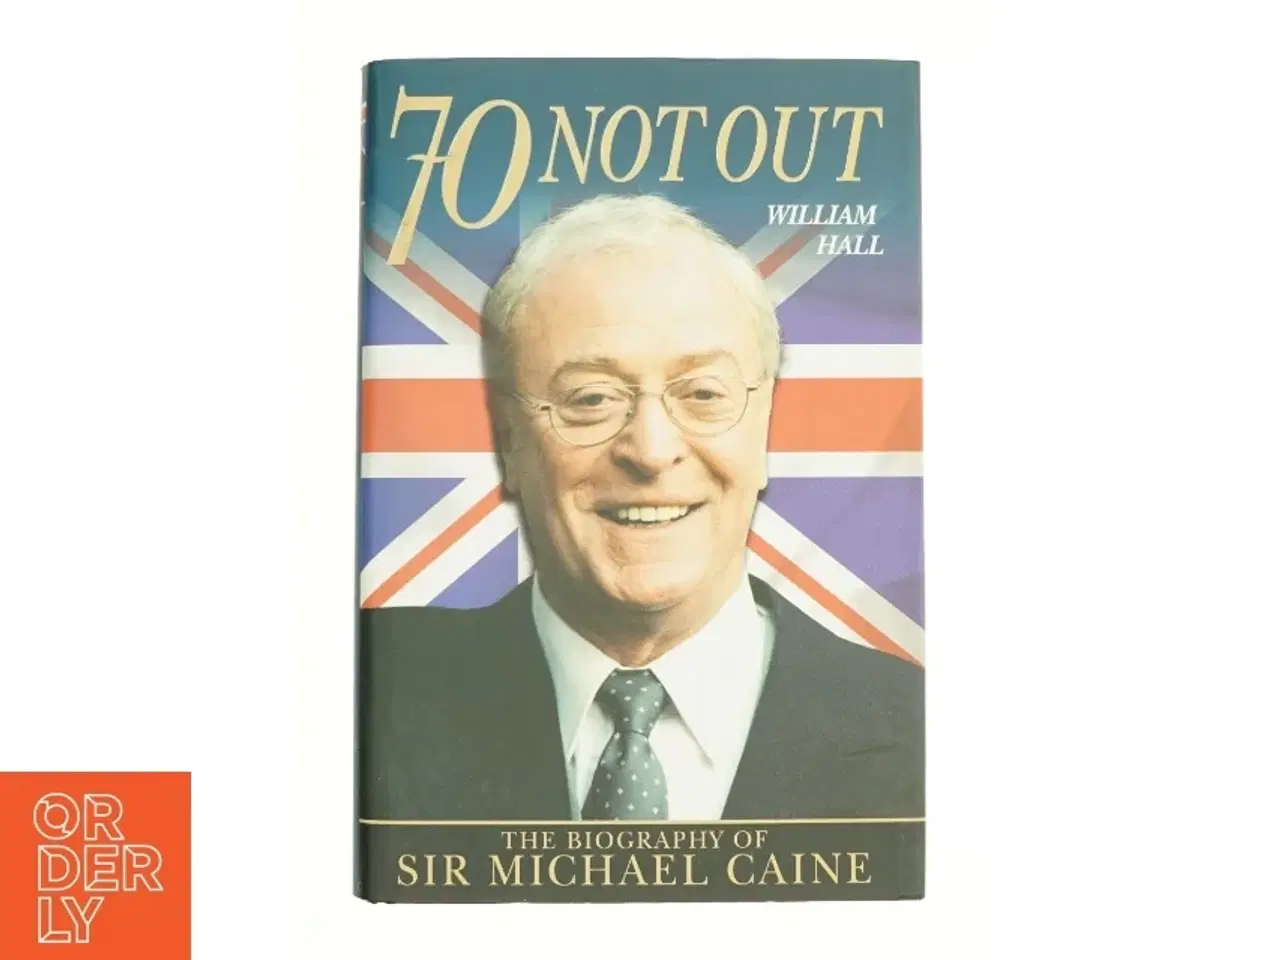 Billede 1 - 70 Not Out: The Biography of Sir Michael Caine by William Hall (Bog)